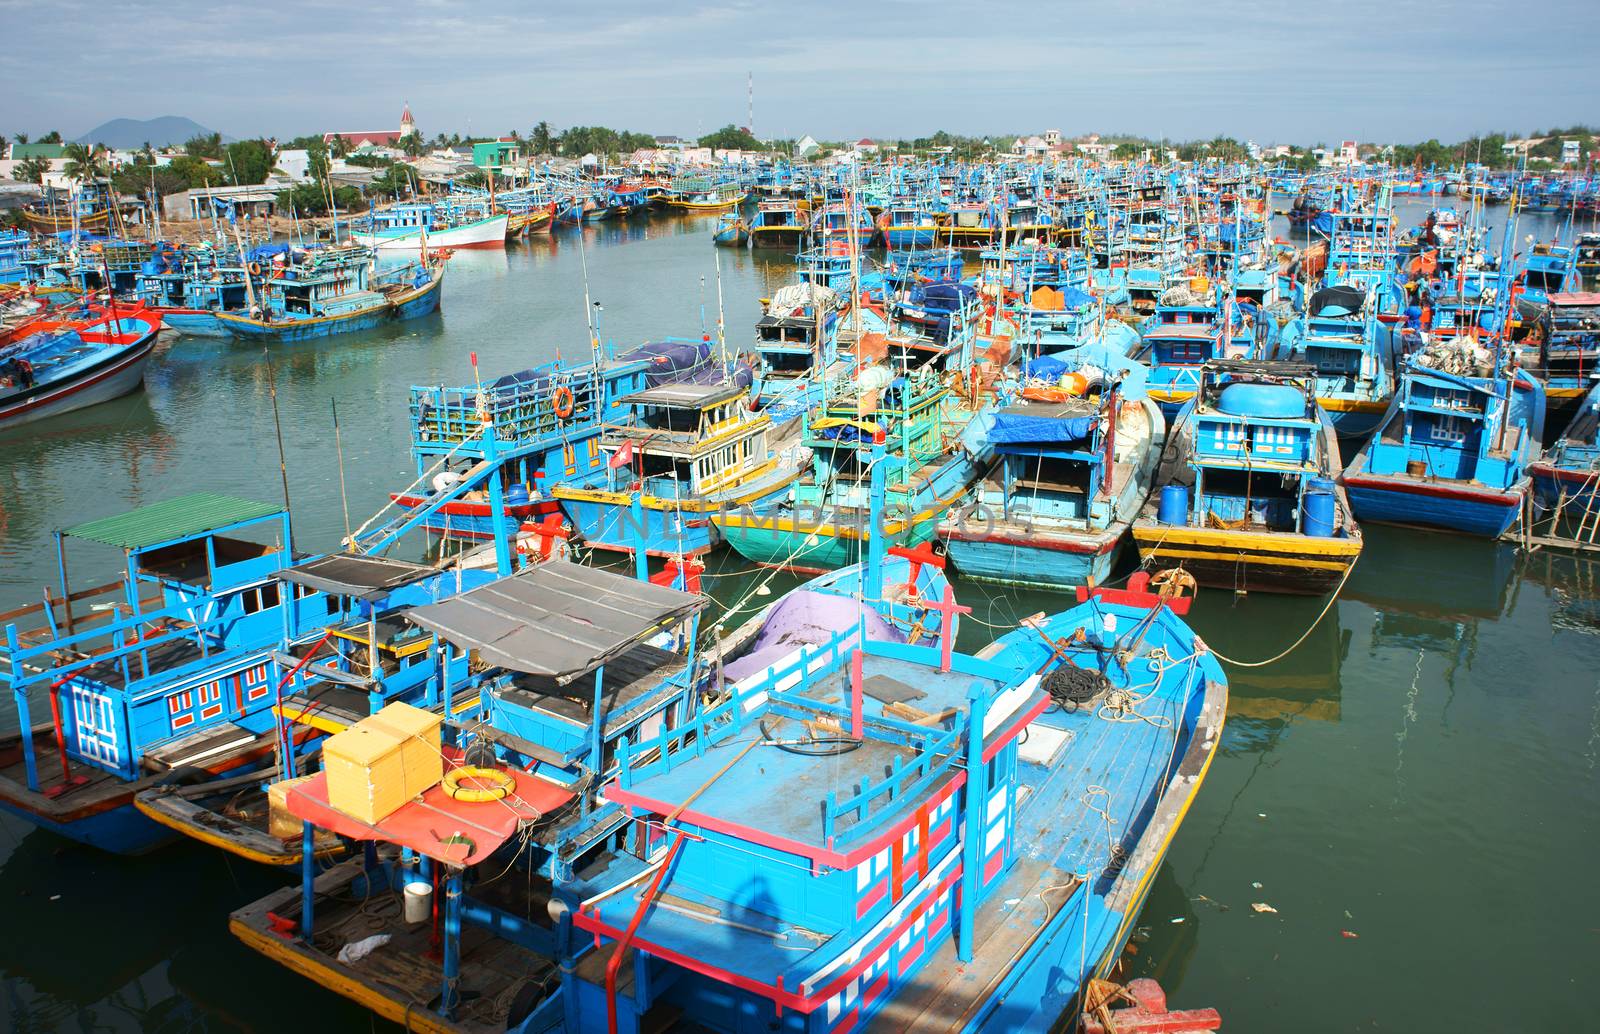 Many multicolor fishing boat anchor like a net at fishing port, with blue tone in horizontal frame. 